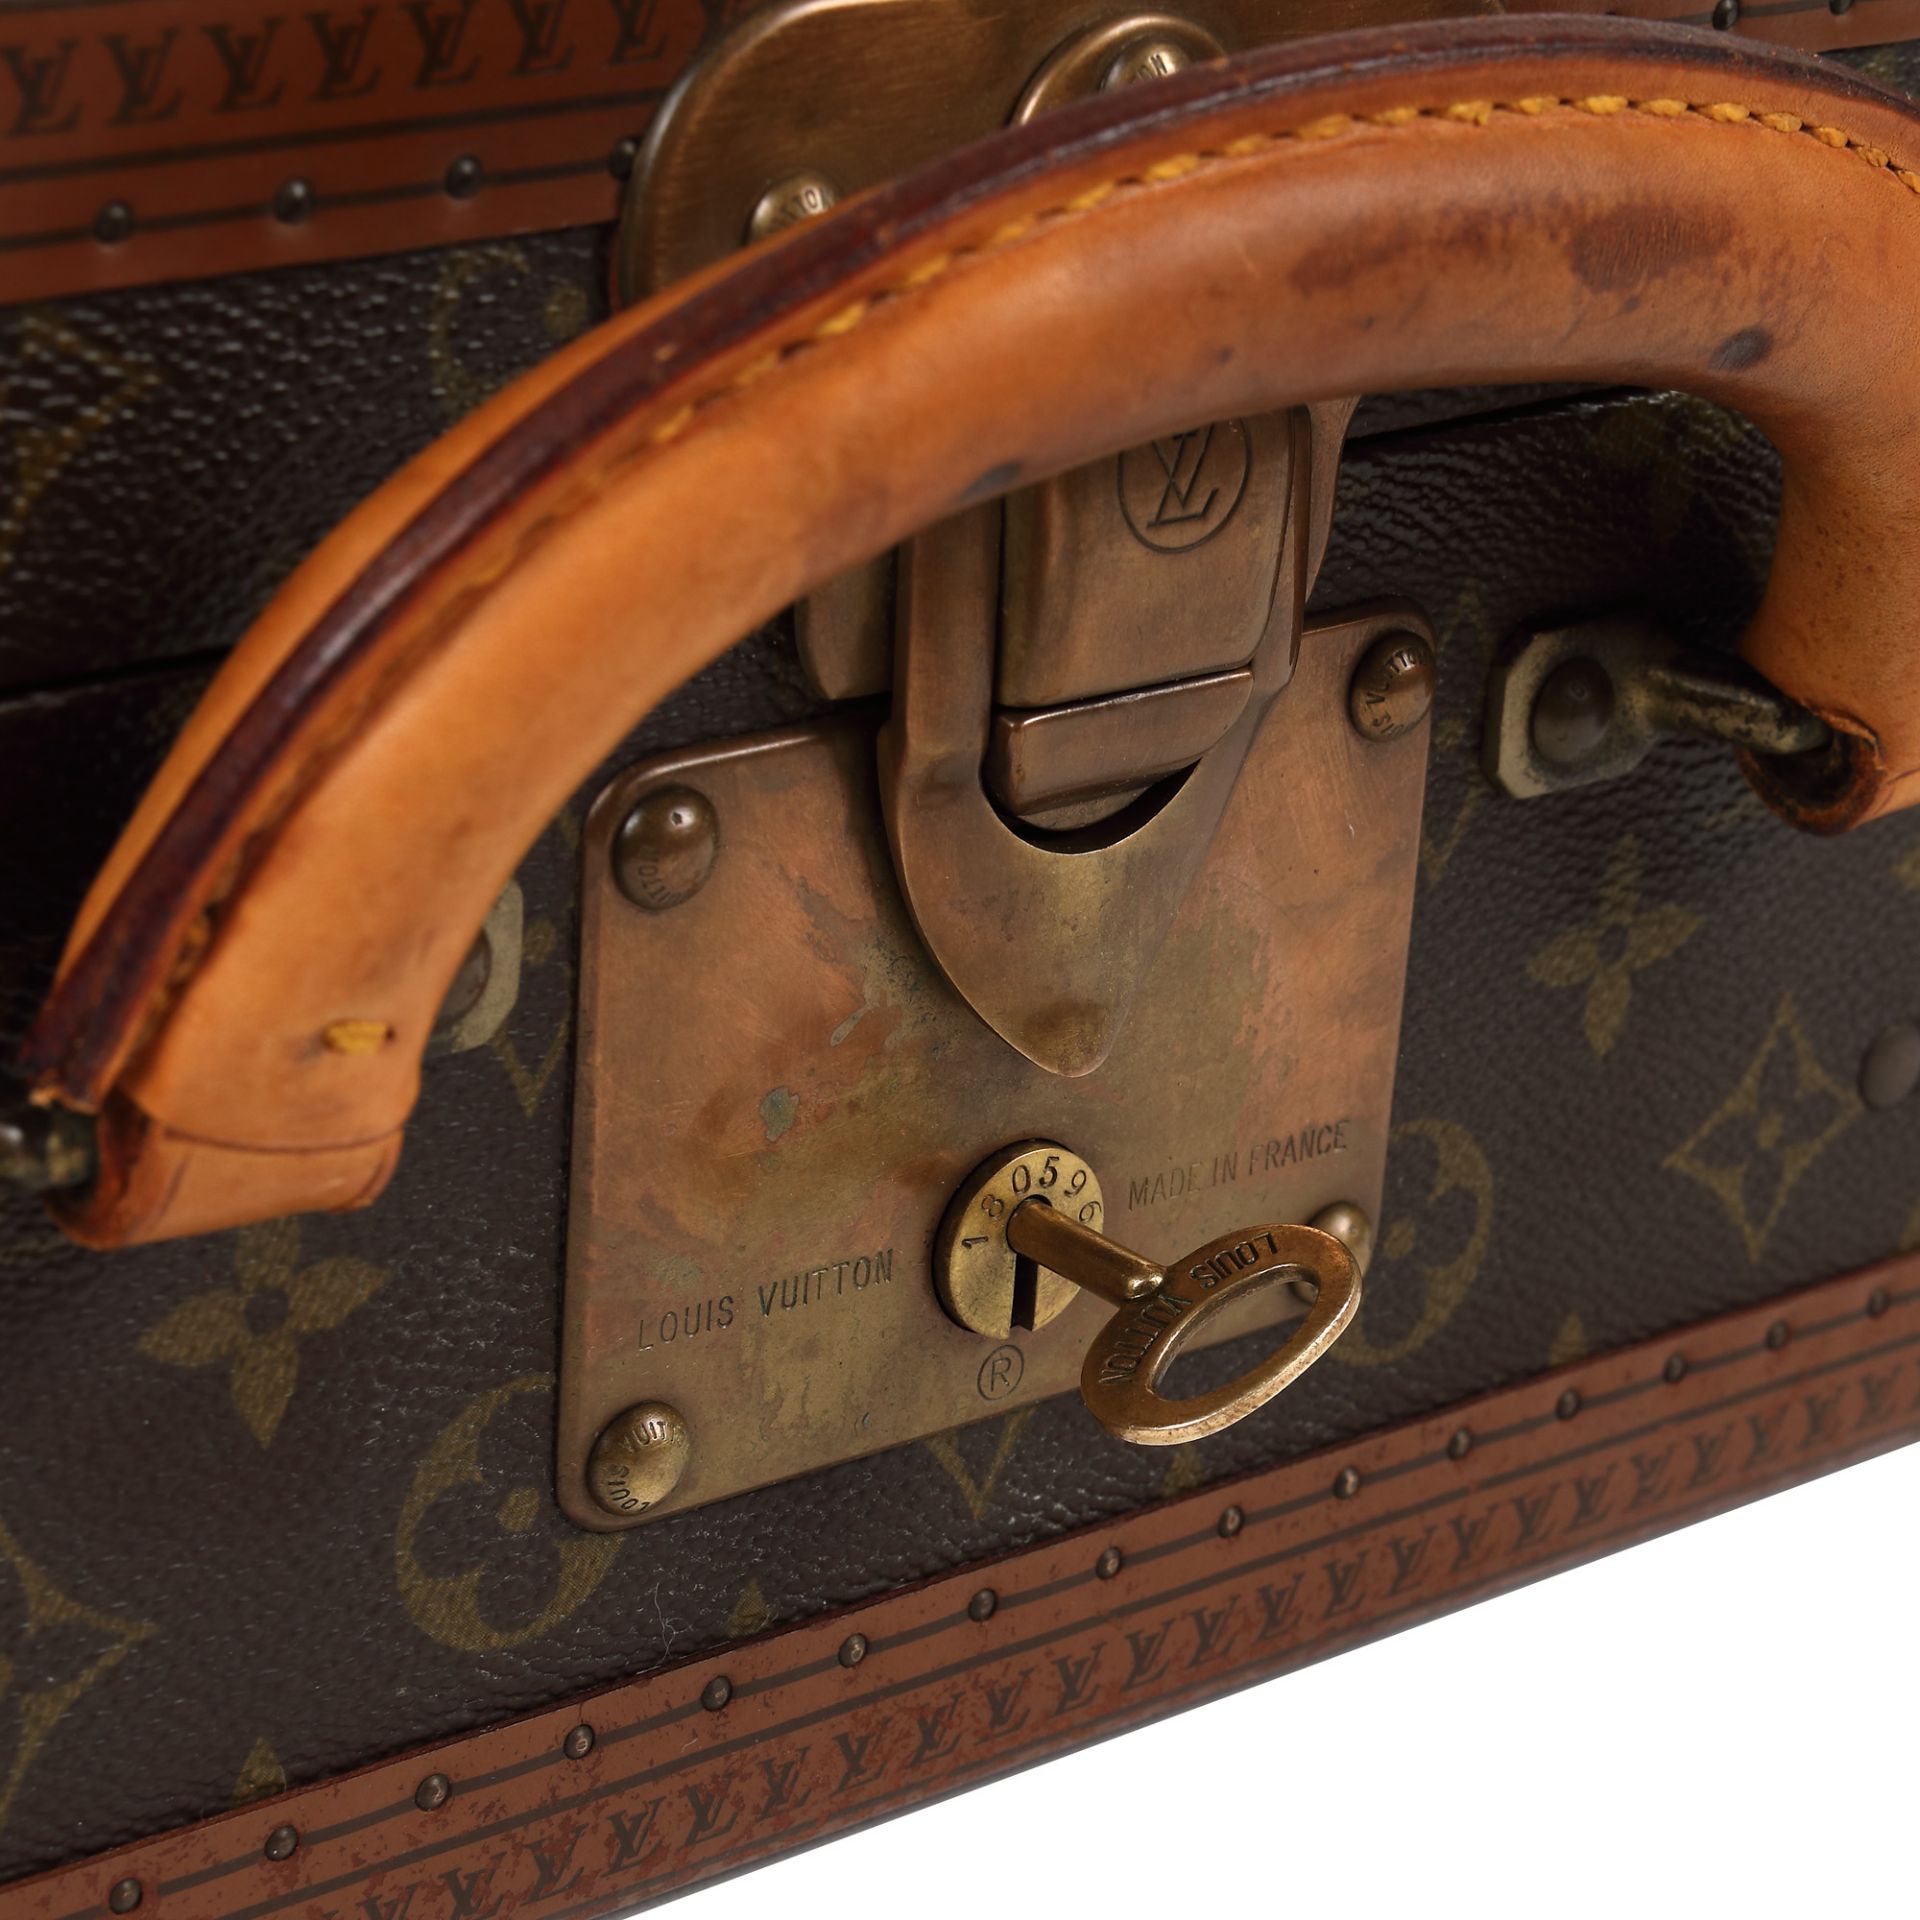 Pair of Louis Vuitton suitcases for travel - Image 2 of 8